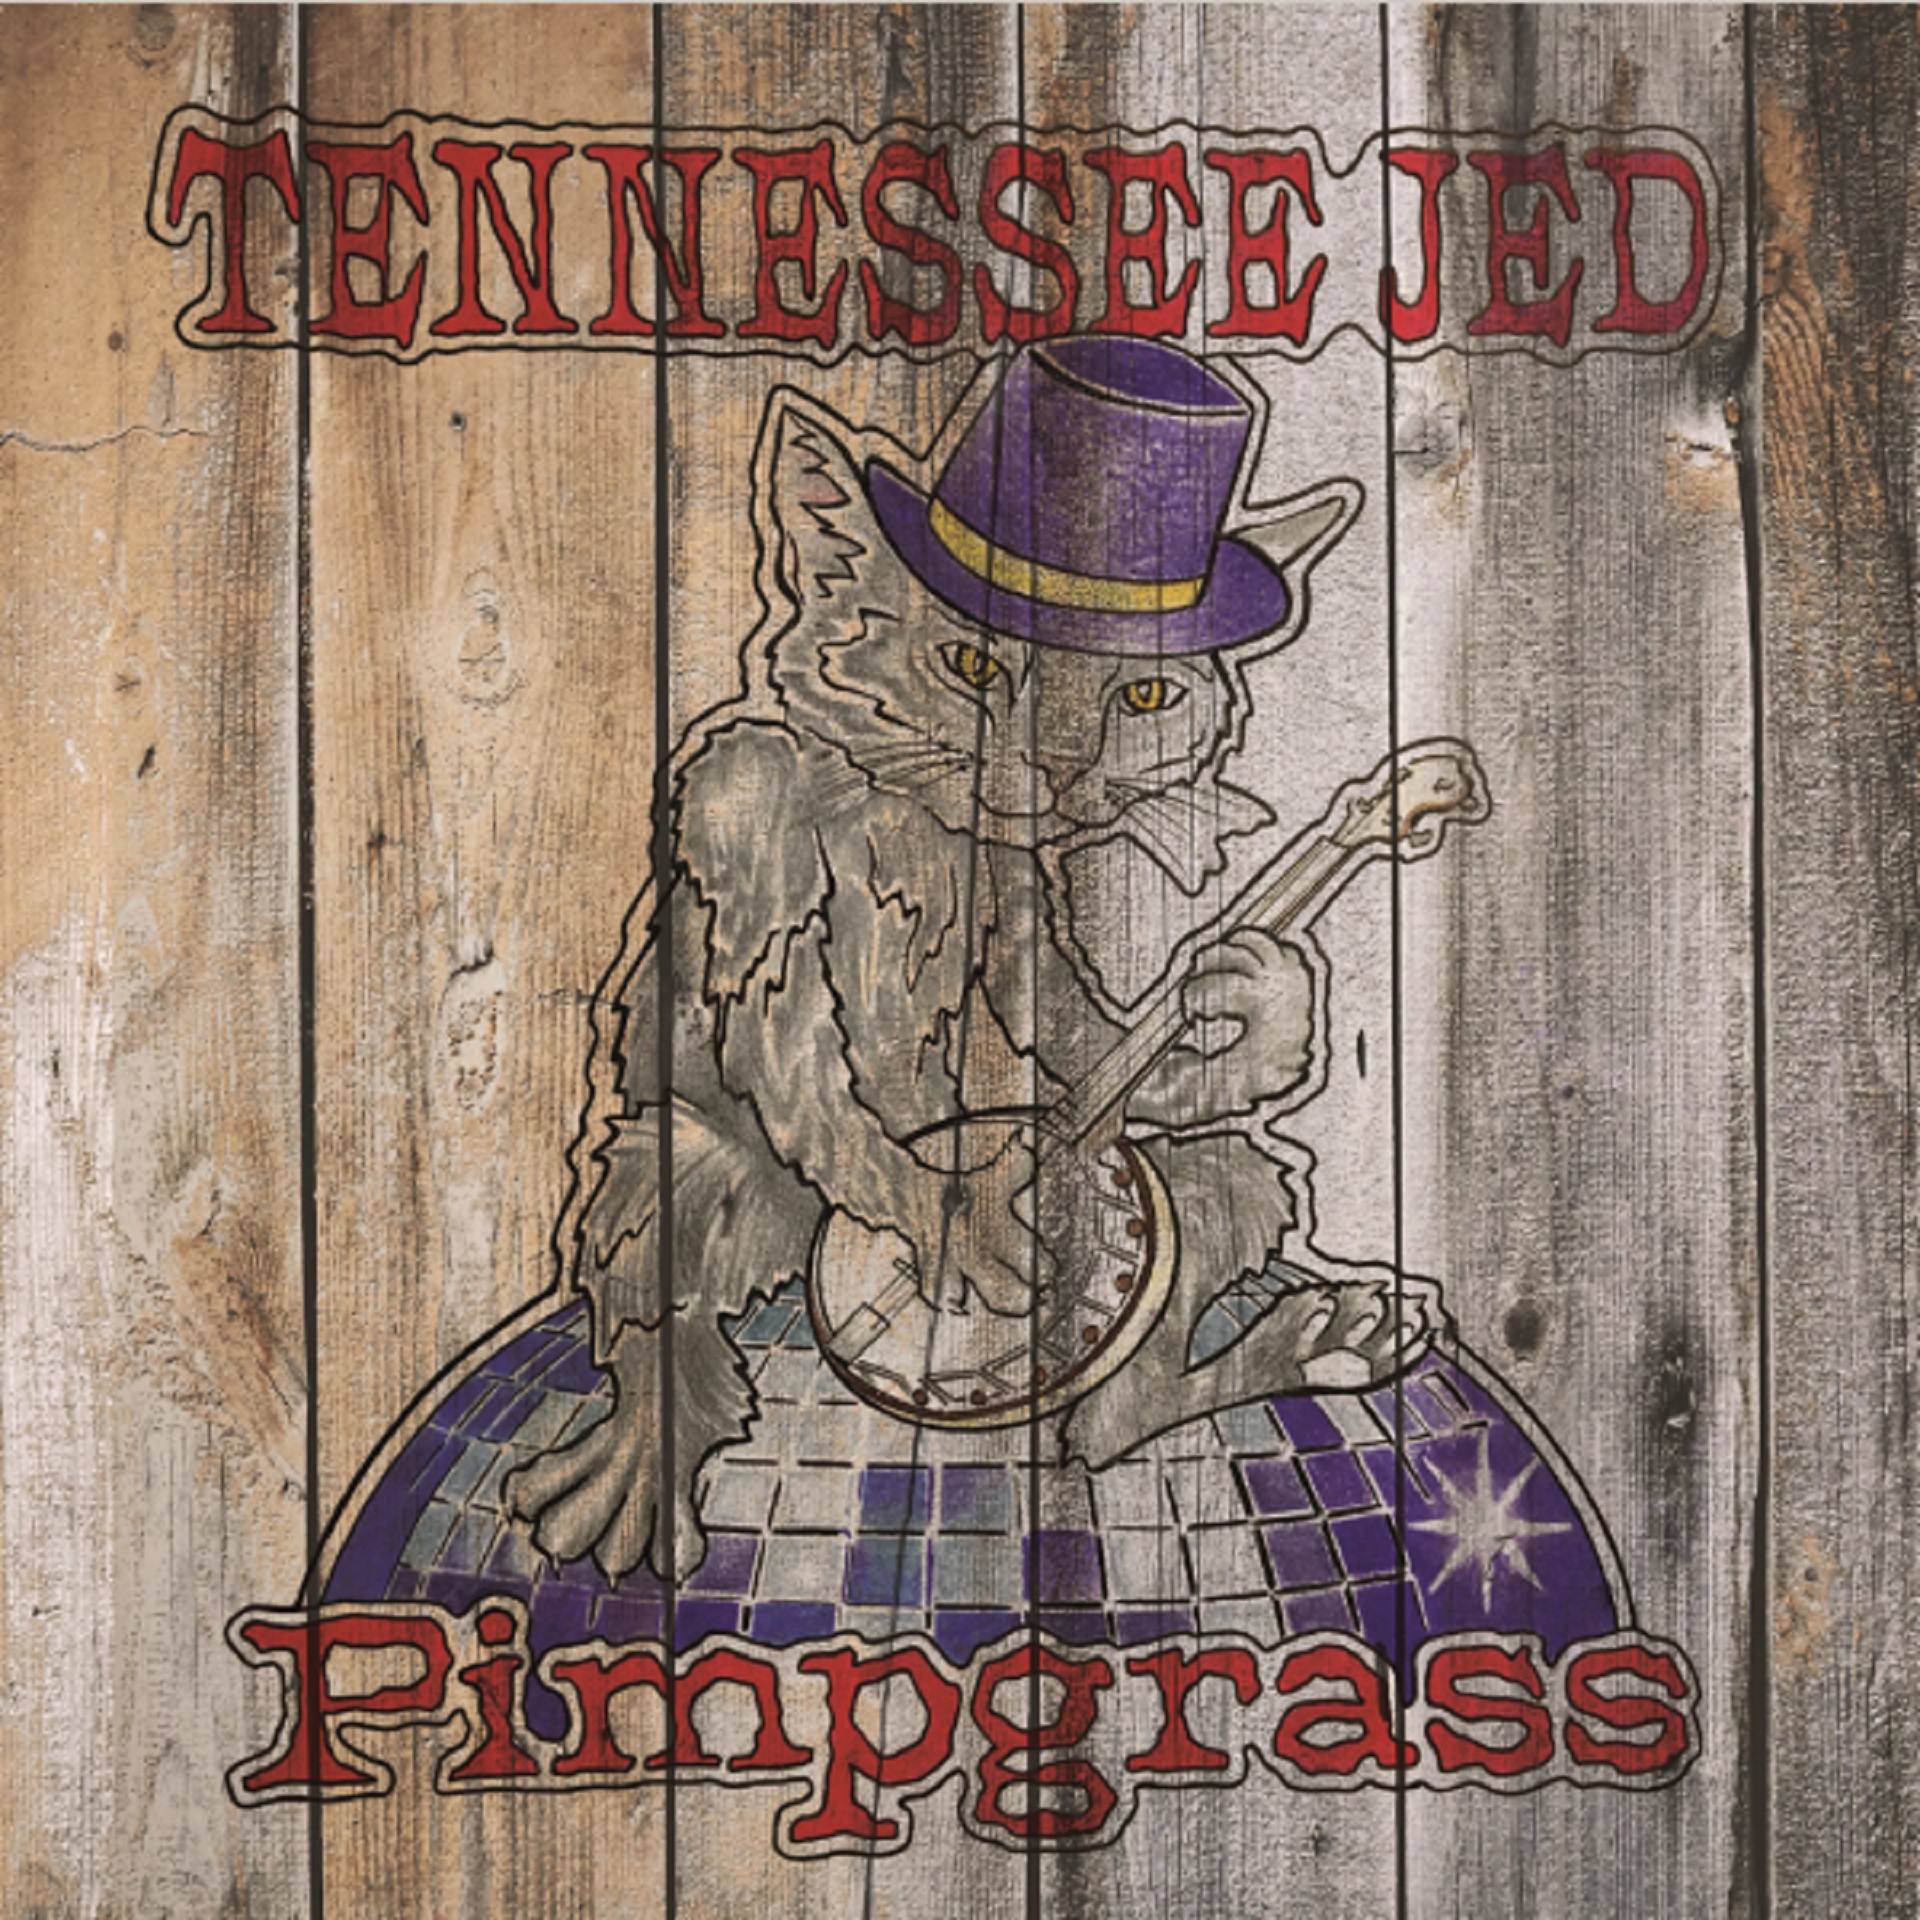 Tennessee Jed Releases Pimpgrass featuring All-Star Band